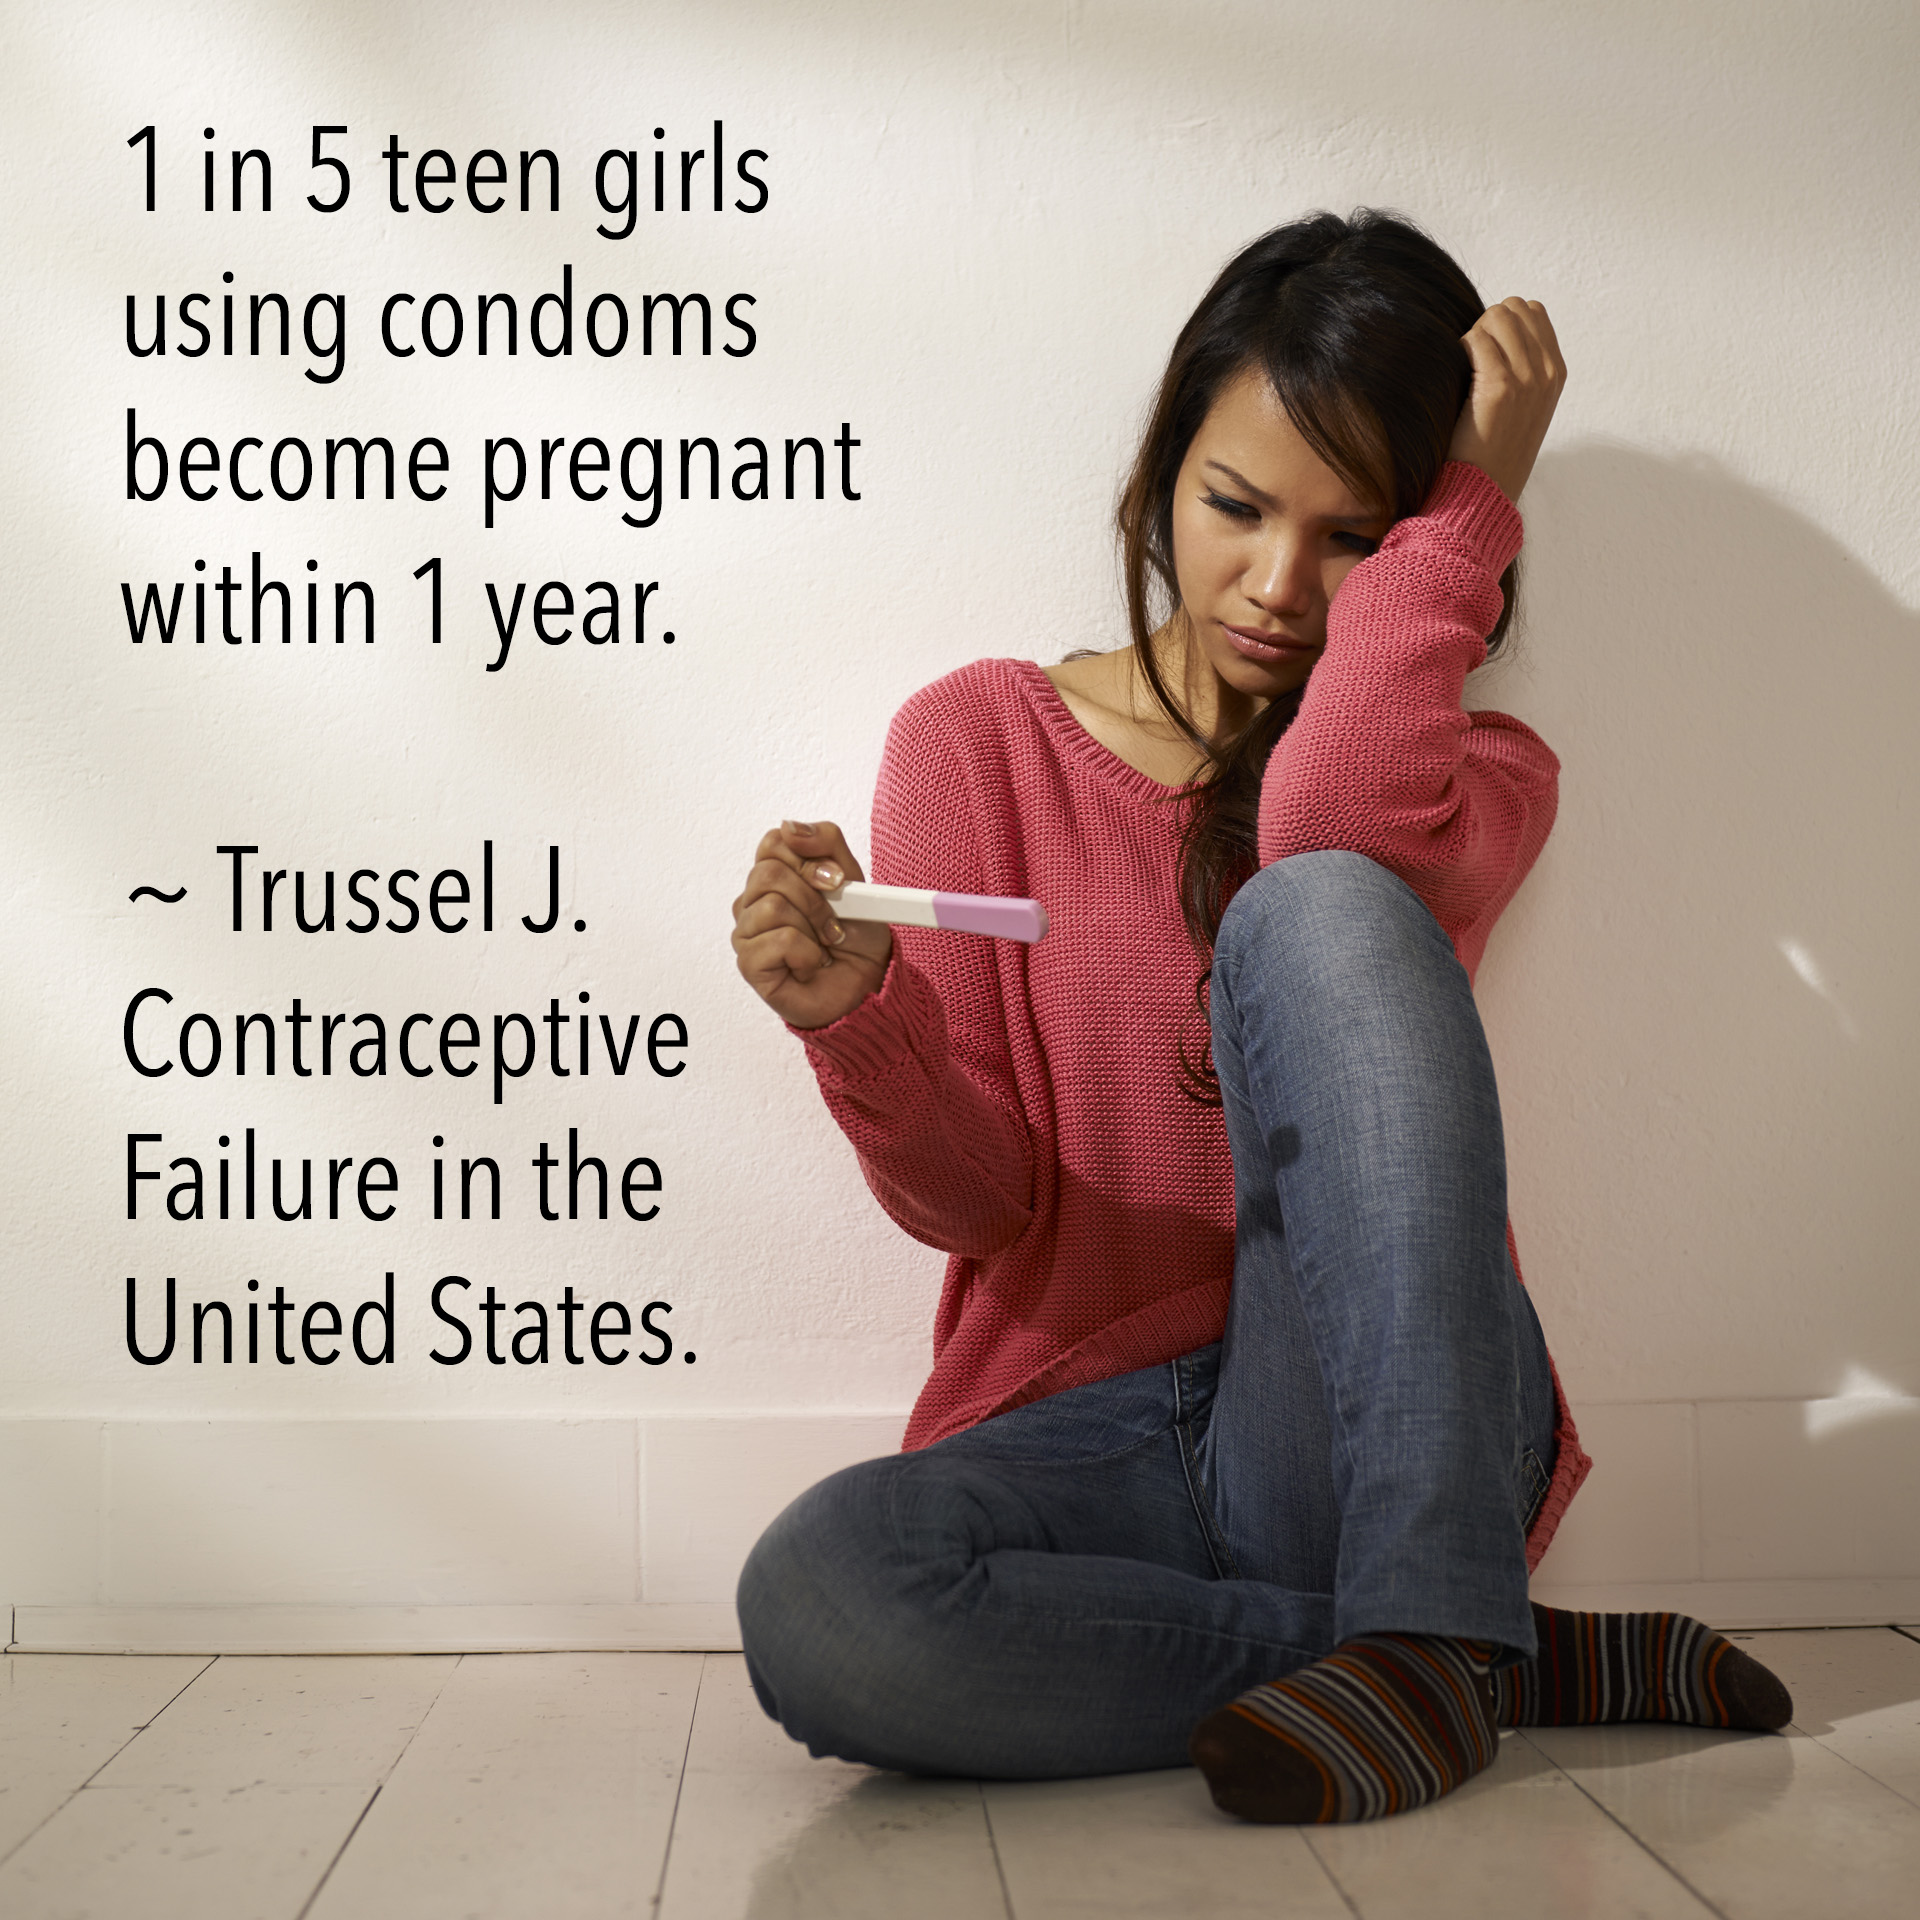 1 in 5 teen girls using condoms become pregnant within 1 year